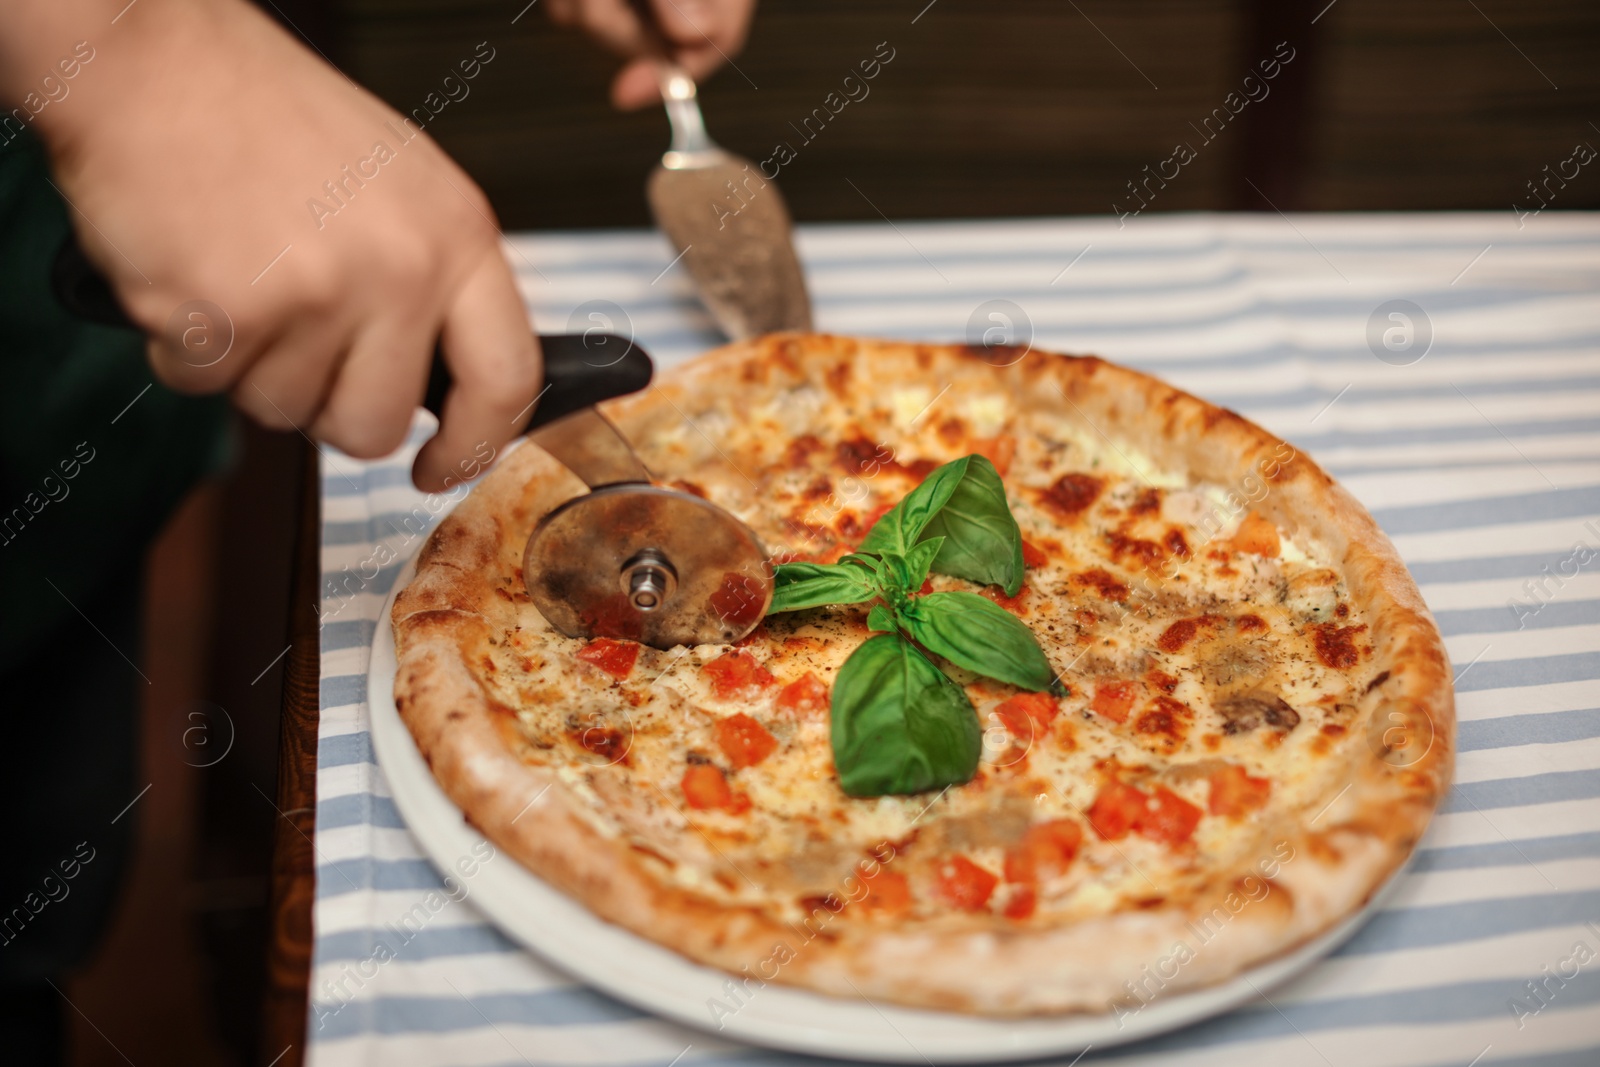 Photo of Man cutting tasty oven baked pizza on table, closeup